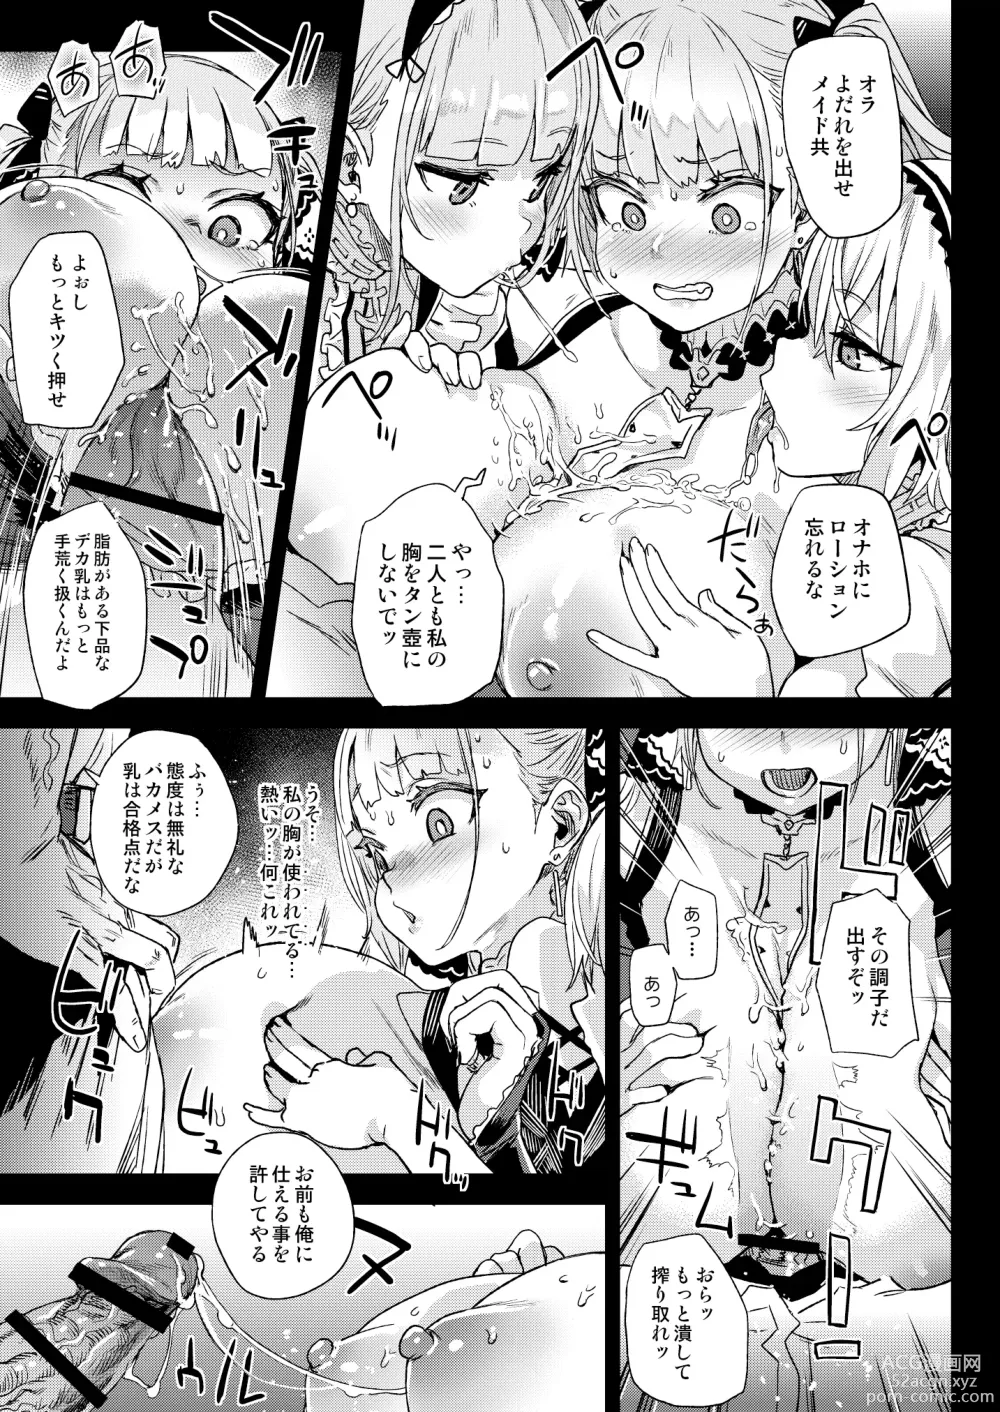 Page 7 of doujinshi Lady falls into a maid